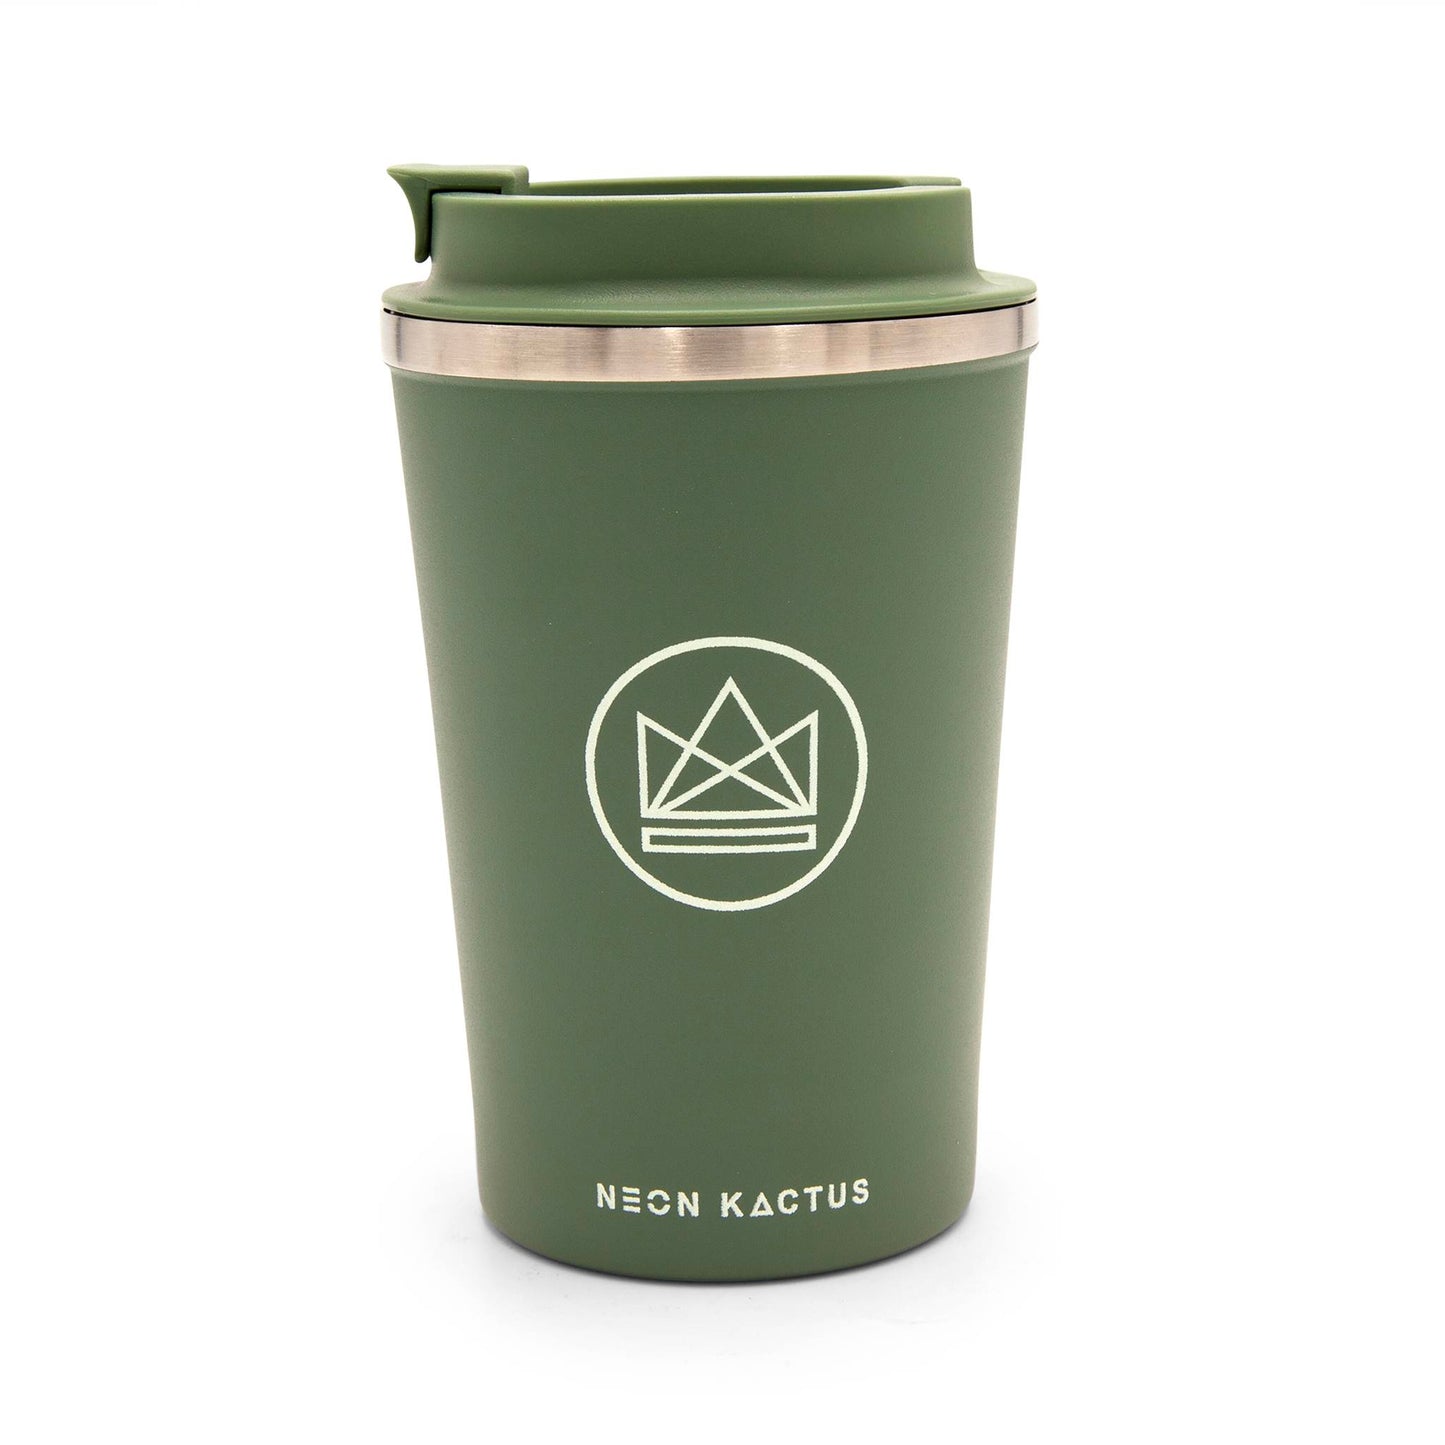 Neon Kactus - Double-Walled Coffee Cup, Reusable Coffee Cup with Resealable Lid, Food-grade Silicone Seal and Sleeve, Insulated